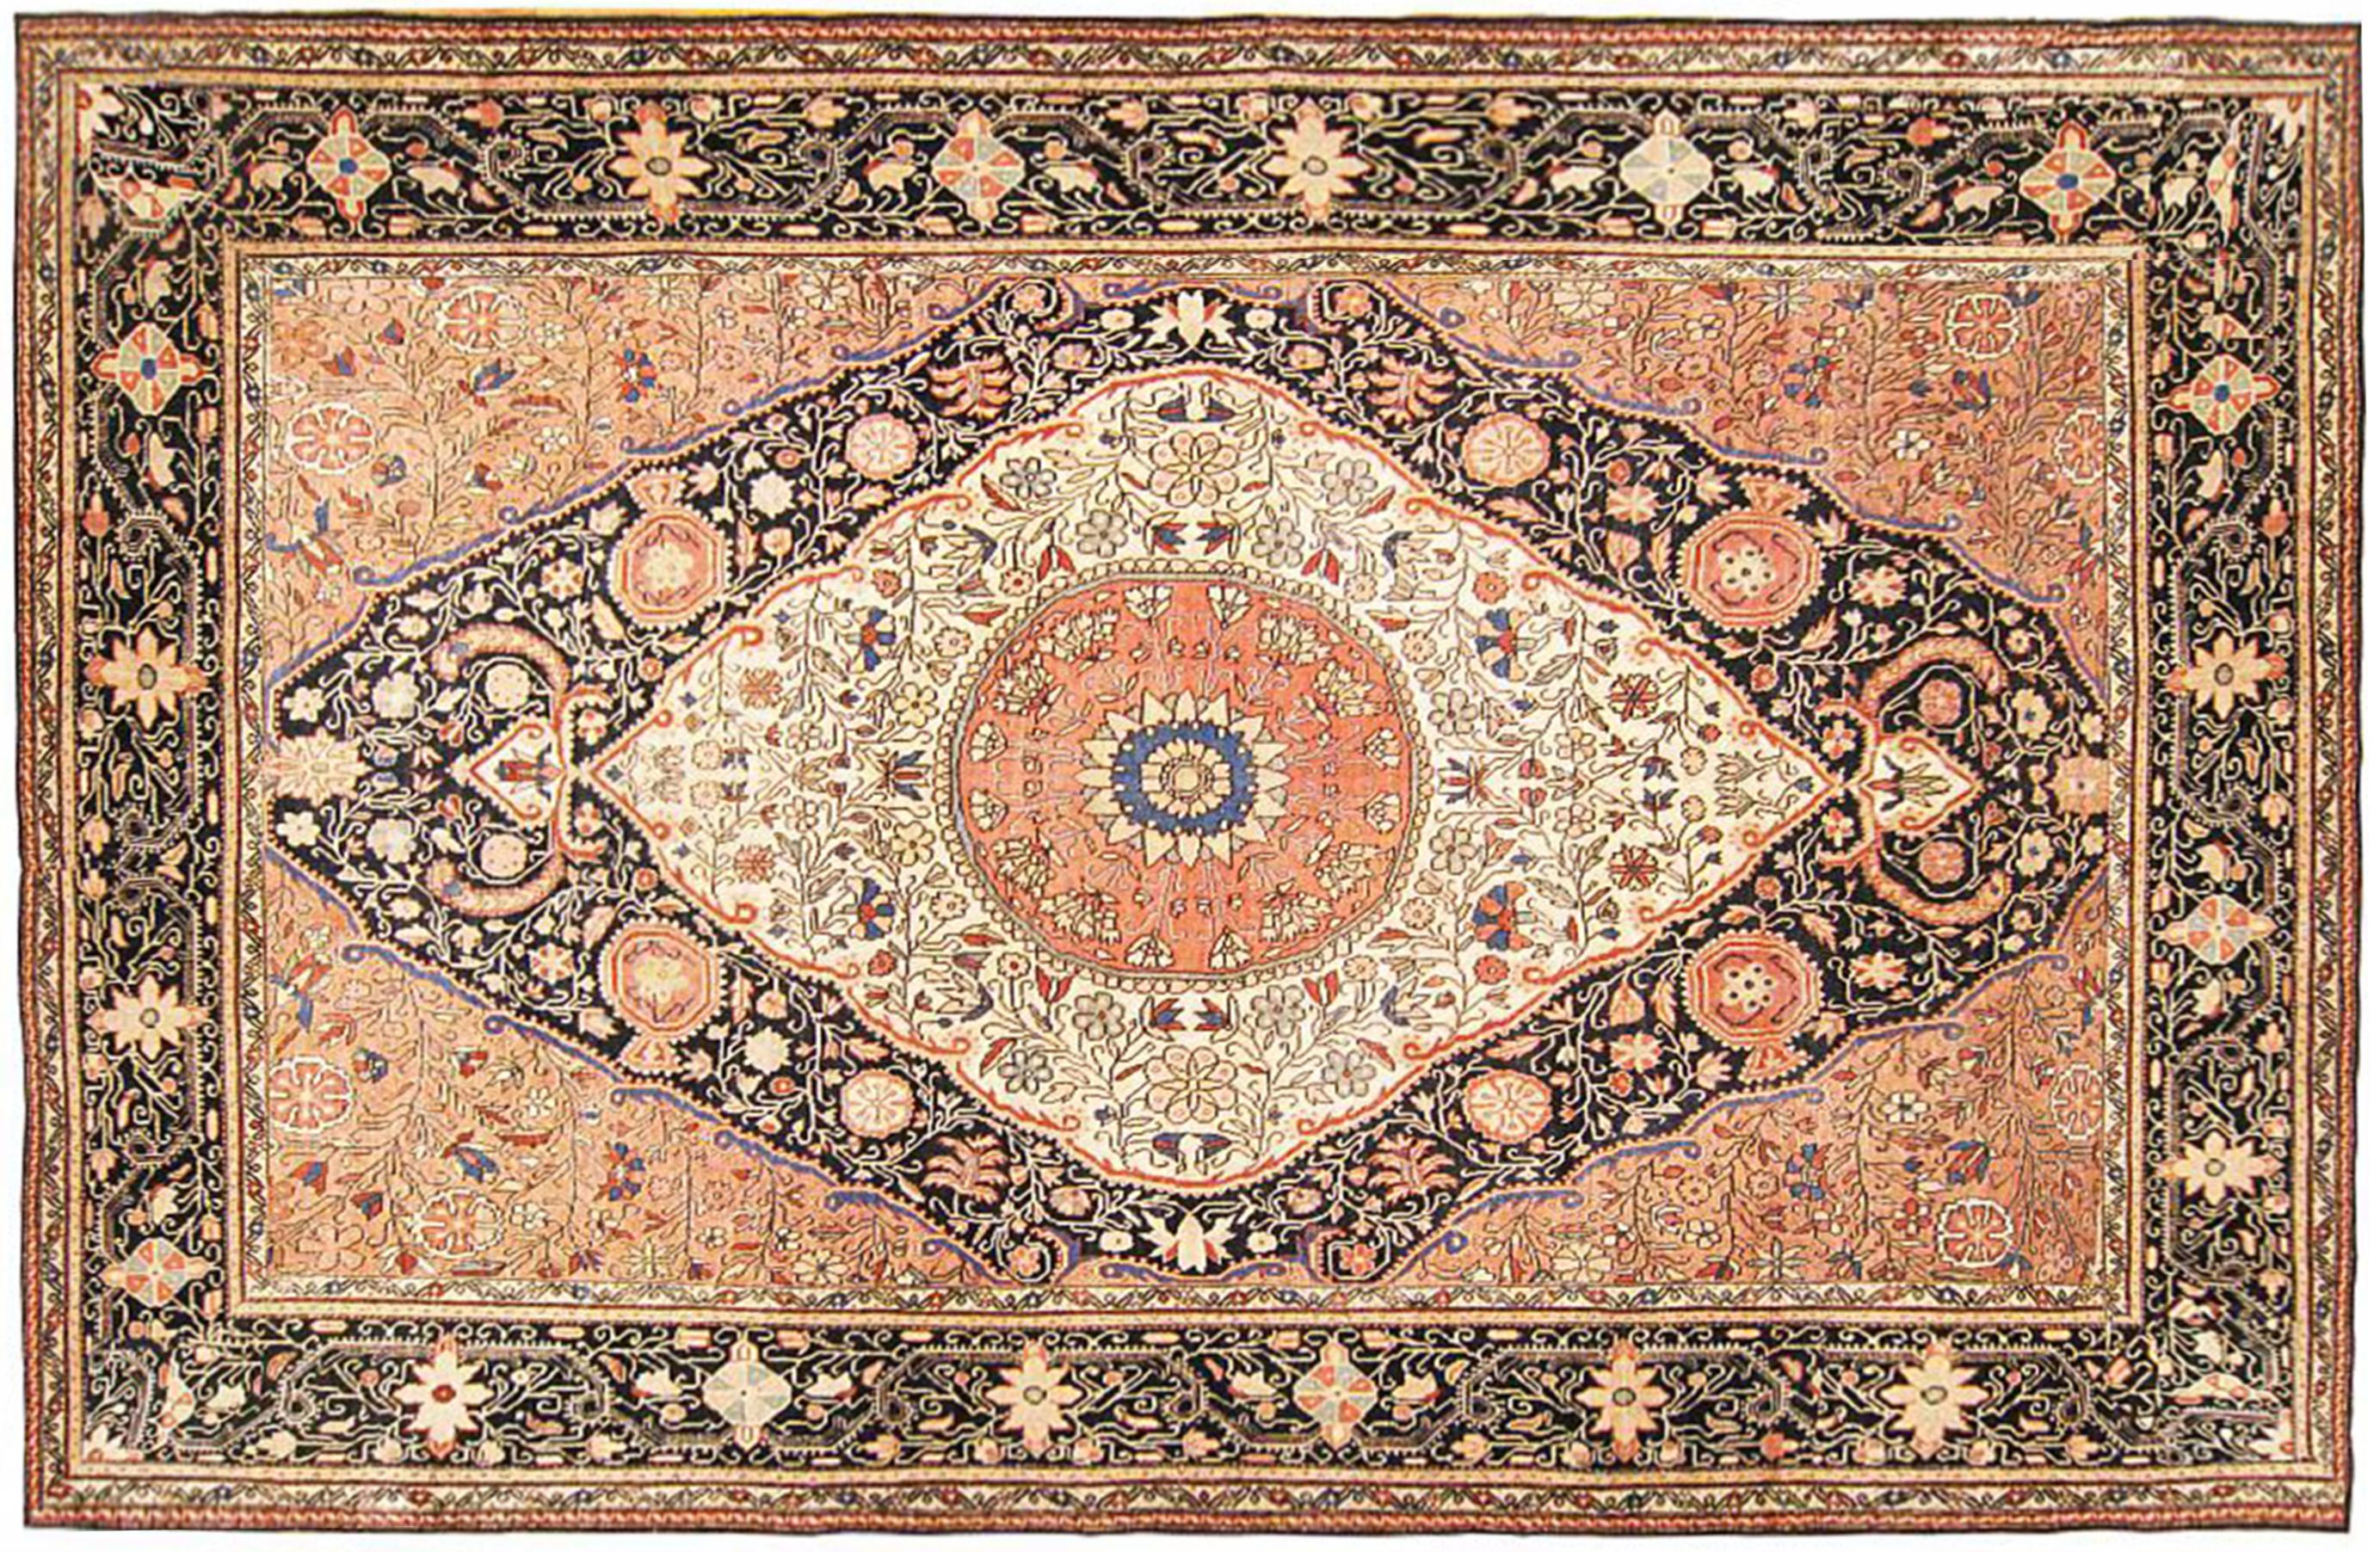 Antique Ferahan Sarouk Oriental Rug, in Room Size, with Central Medallion